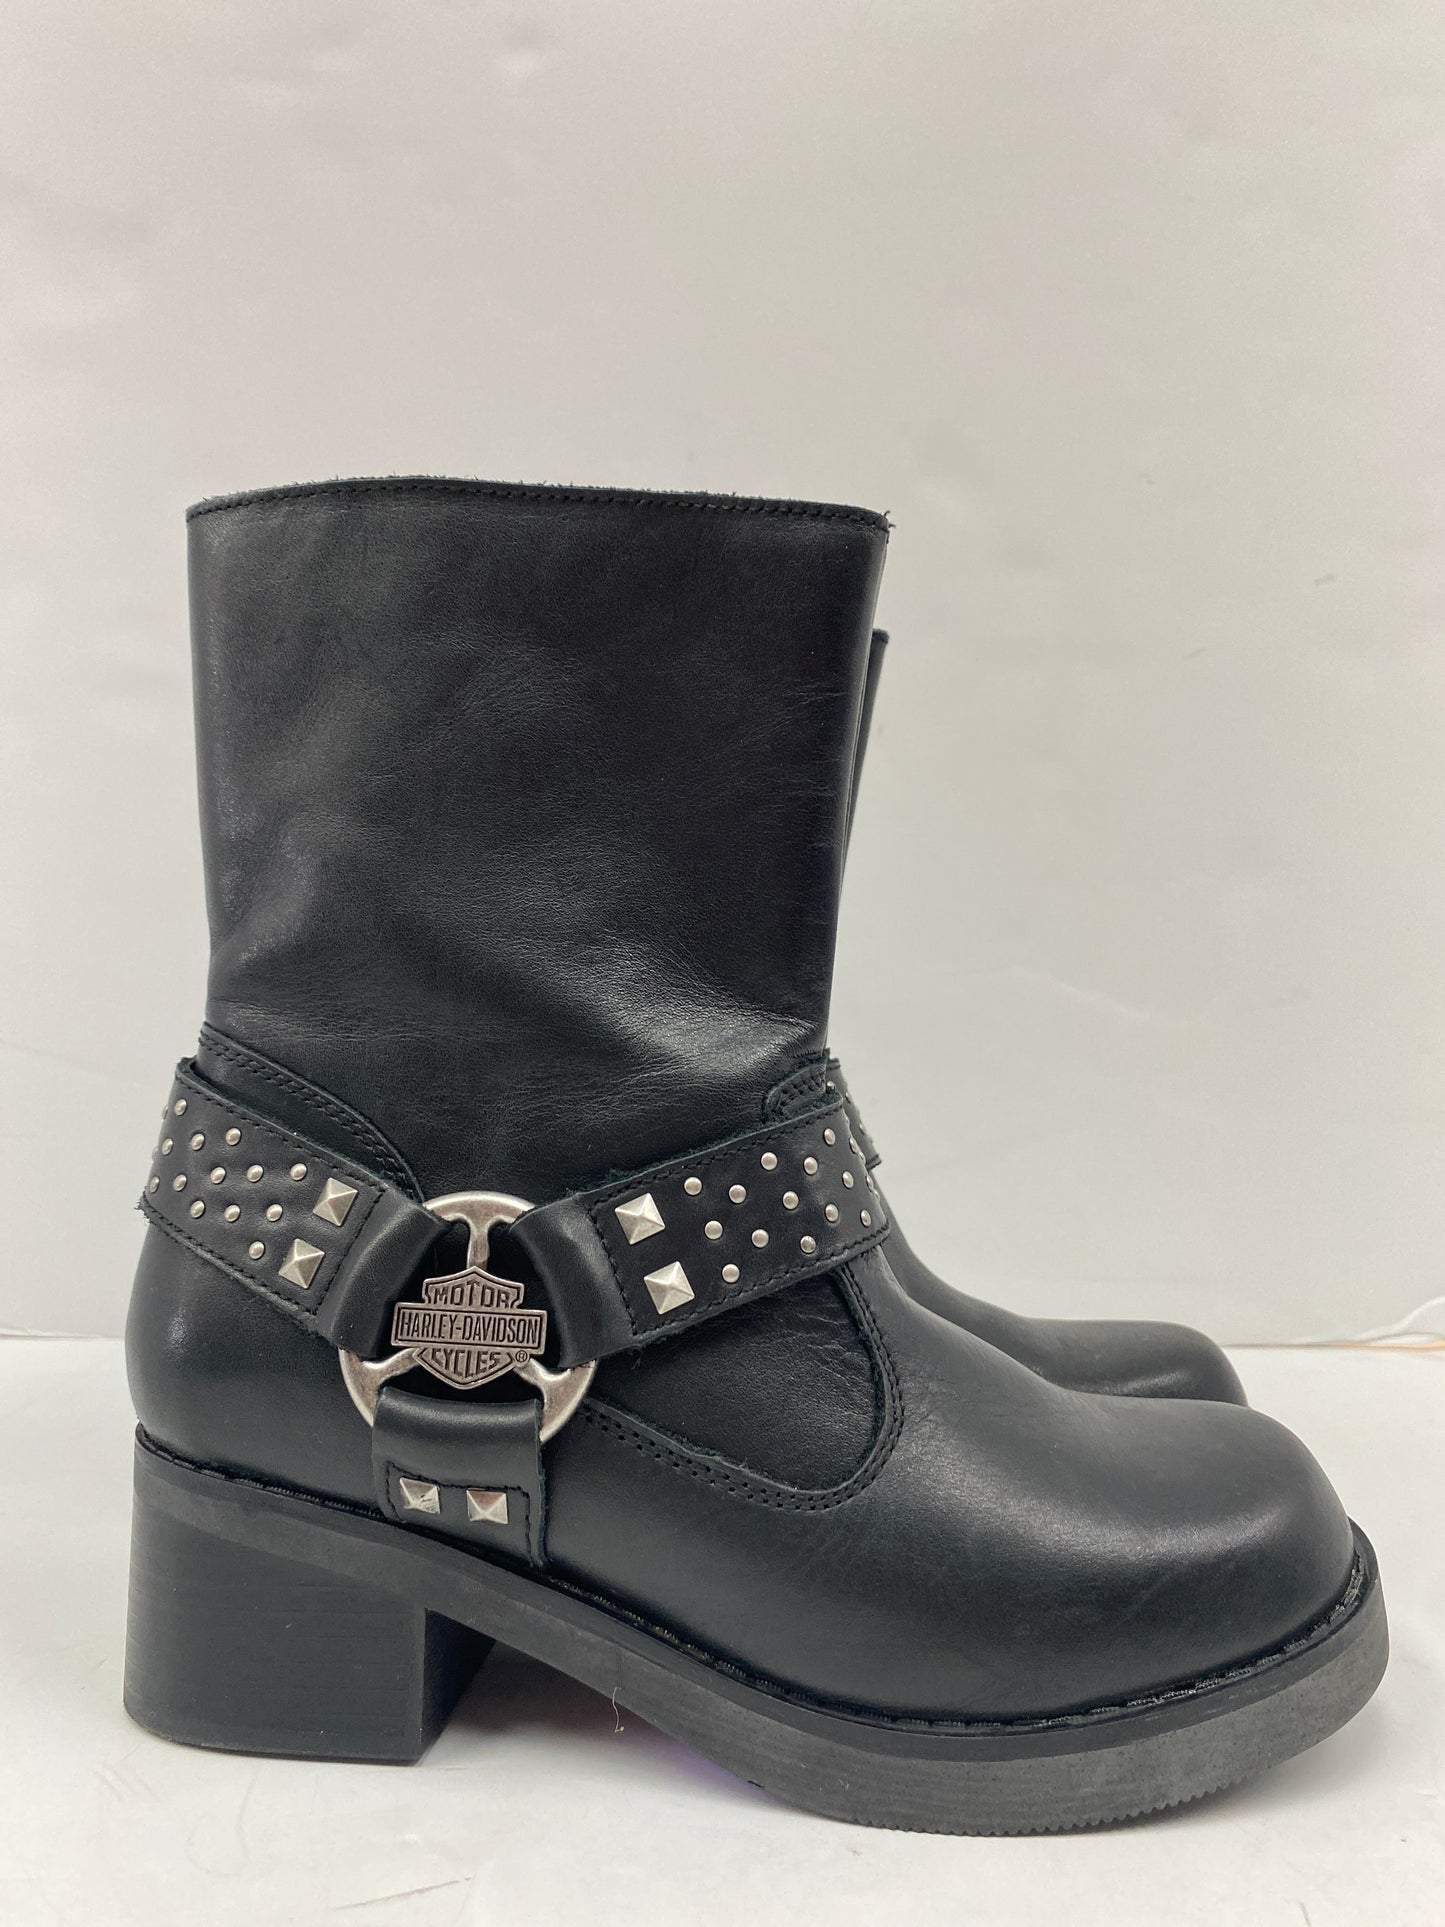 Boots Ankle Heels By Harley Davidson  Size: 6